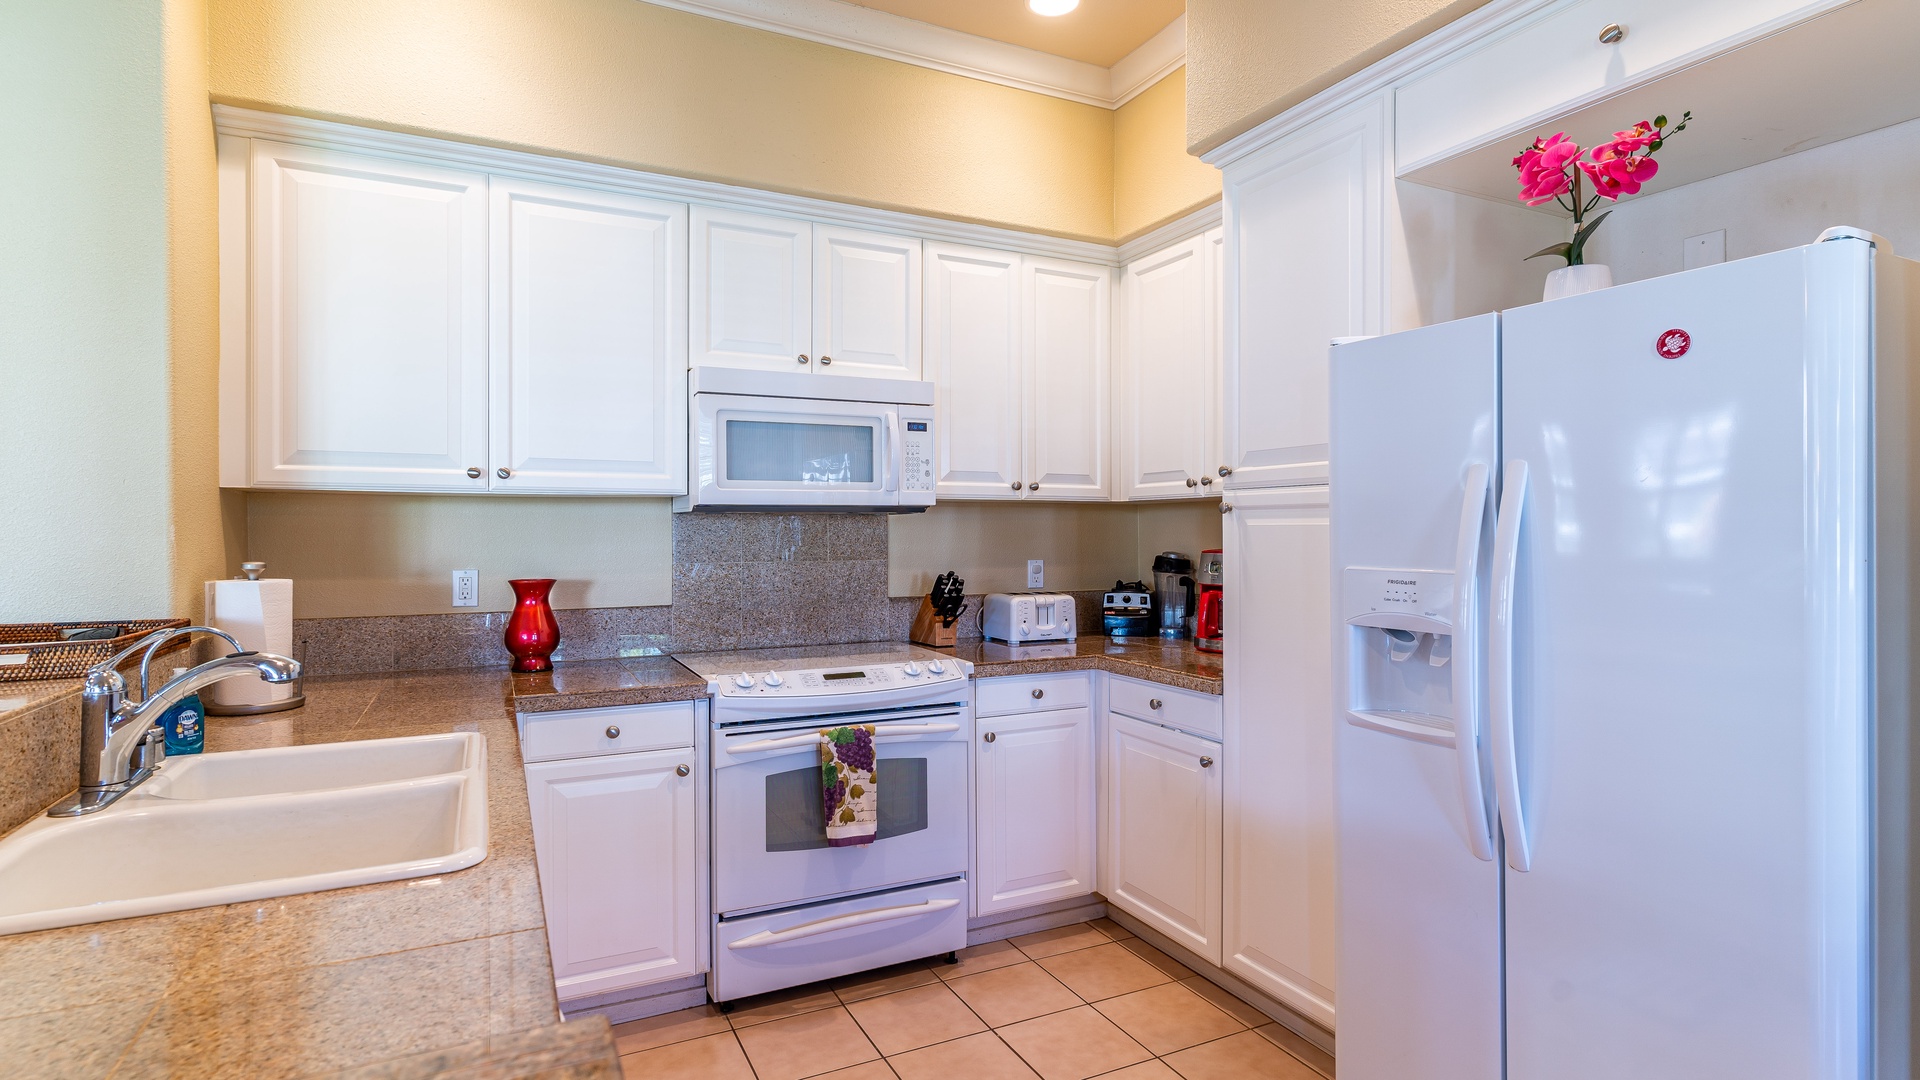 Kapolei Vacation Rentals, Coconut Plantation 1174-2 - Gracious amenities for your culinary adventures in the kitchen.